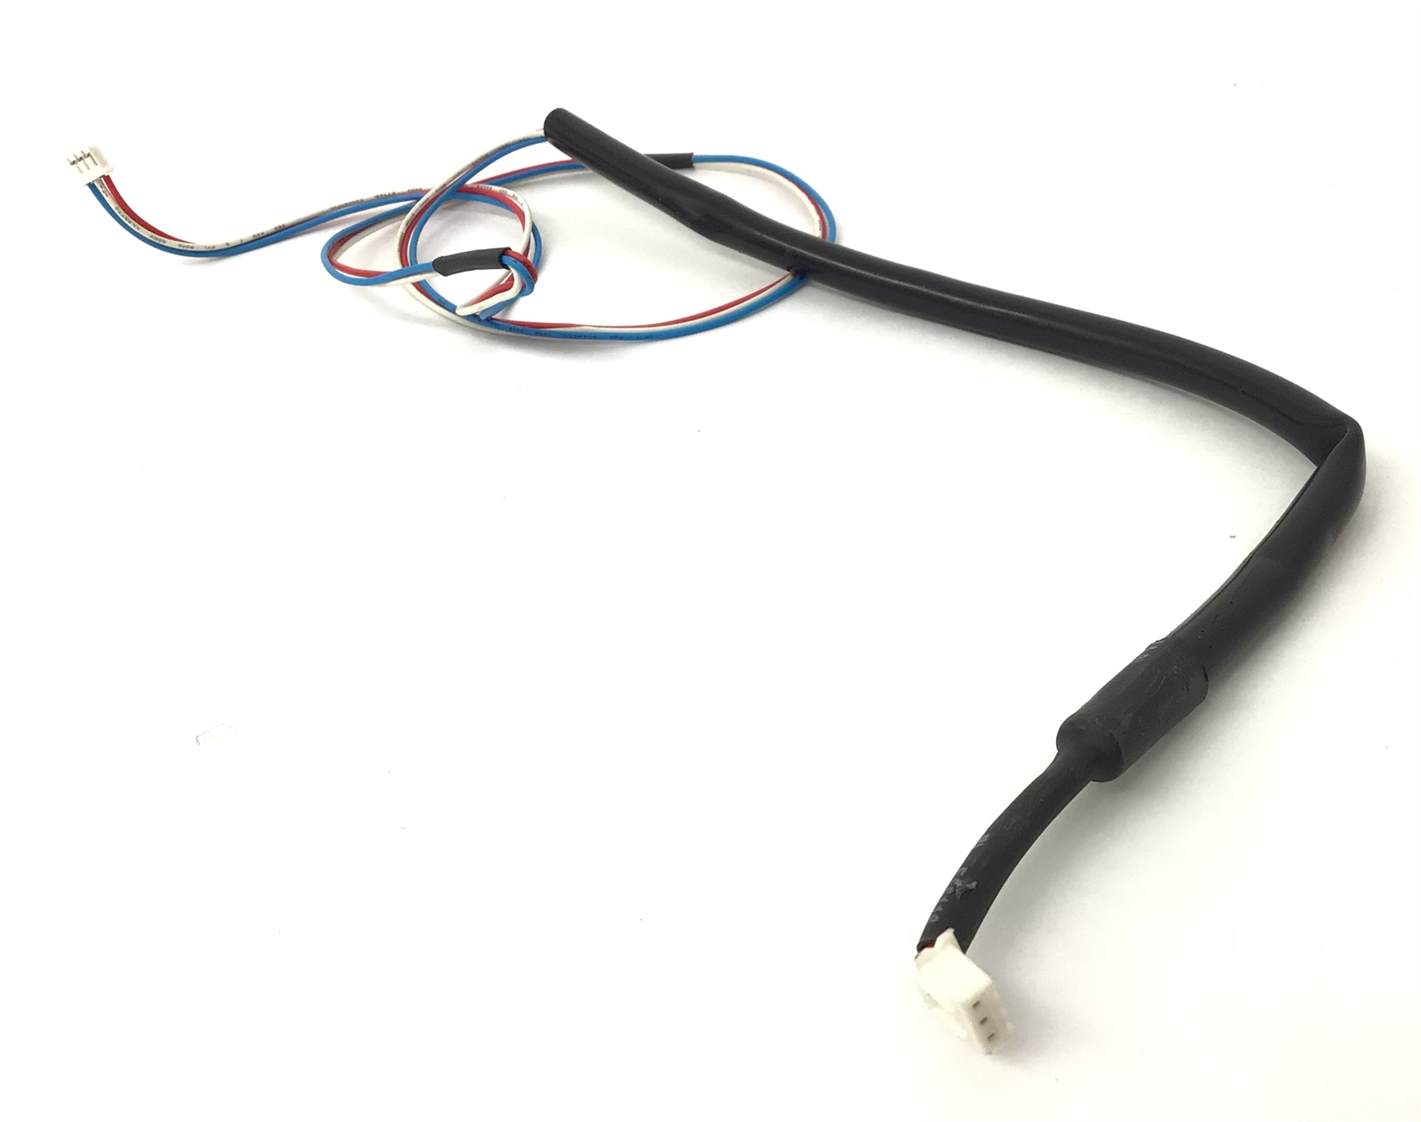 Wire harness (Used)